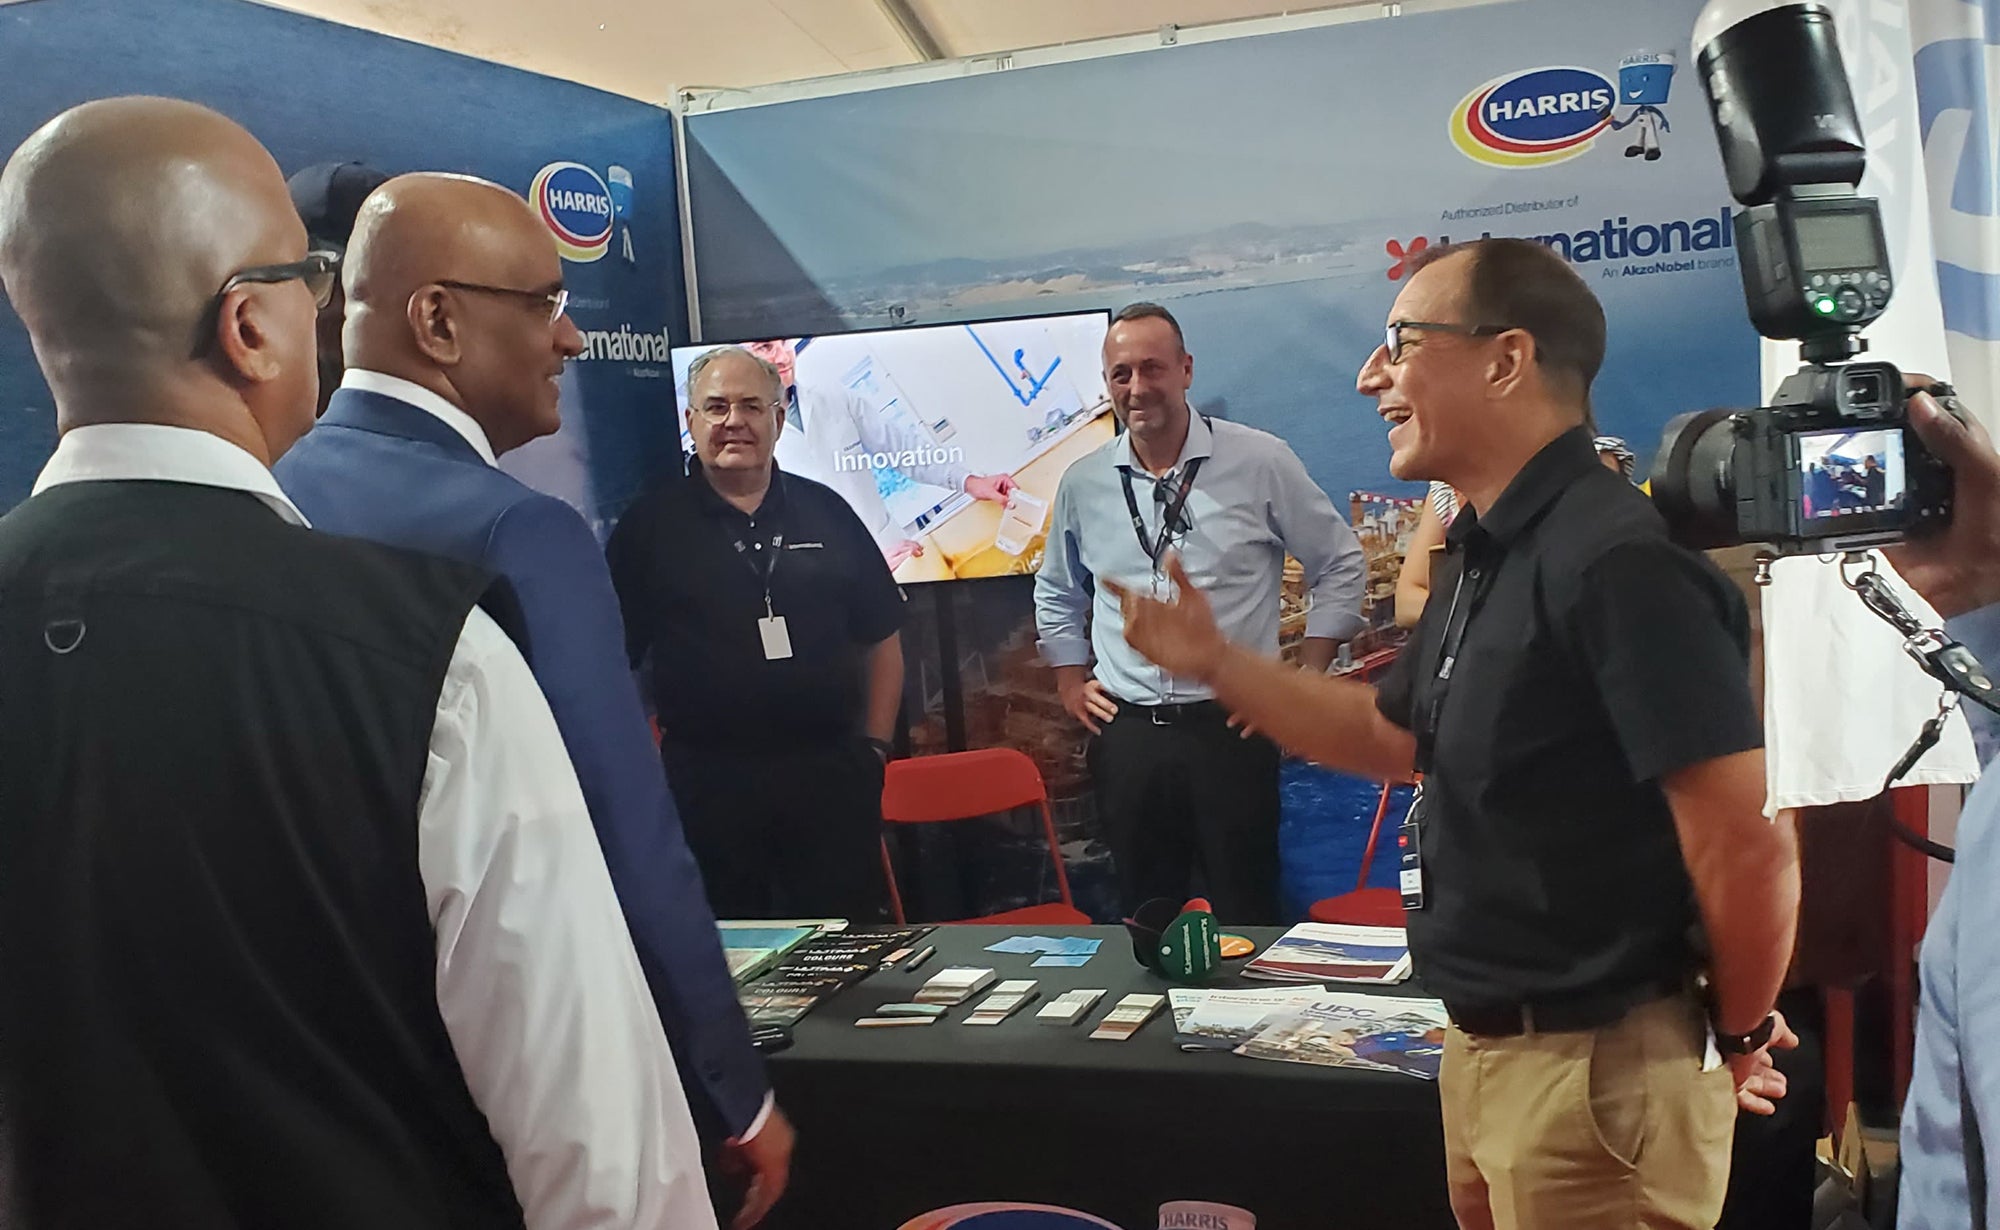 Sales Executive Trade and MPI Architectural Coating Technologist, Carl Ageday and Senior Manager for High Performance Coatings and Trade, Simon Cabral share their expertise and impress the President with the range of coatings solutions